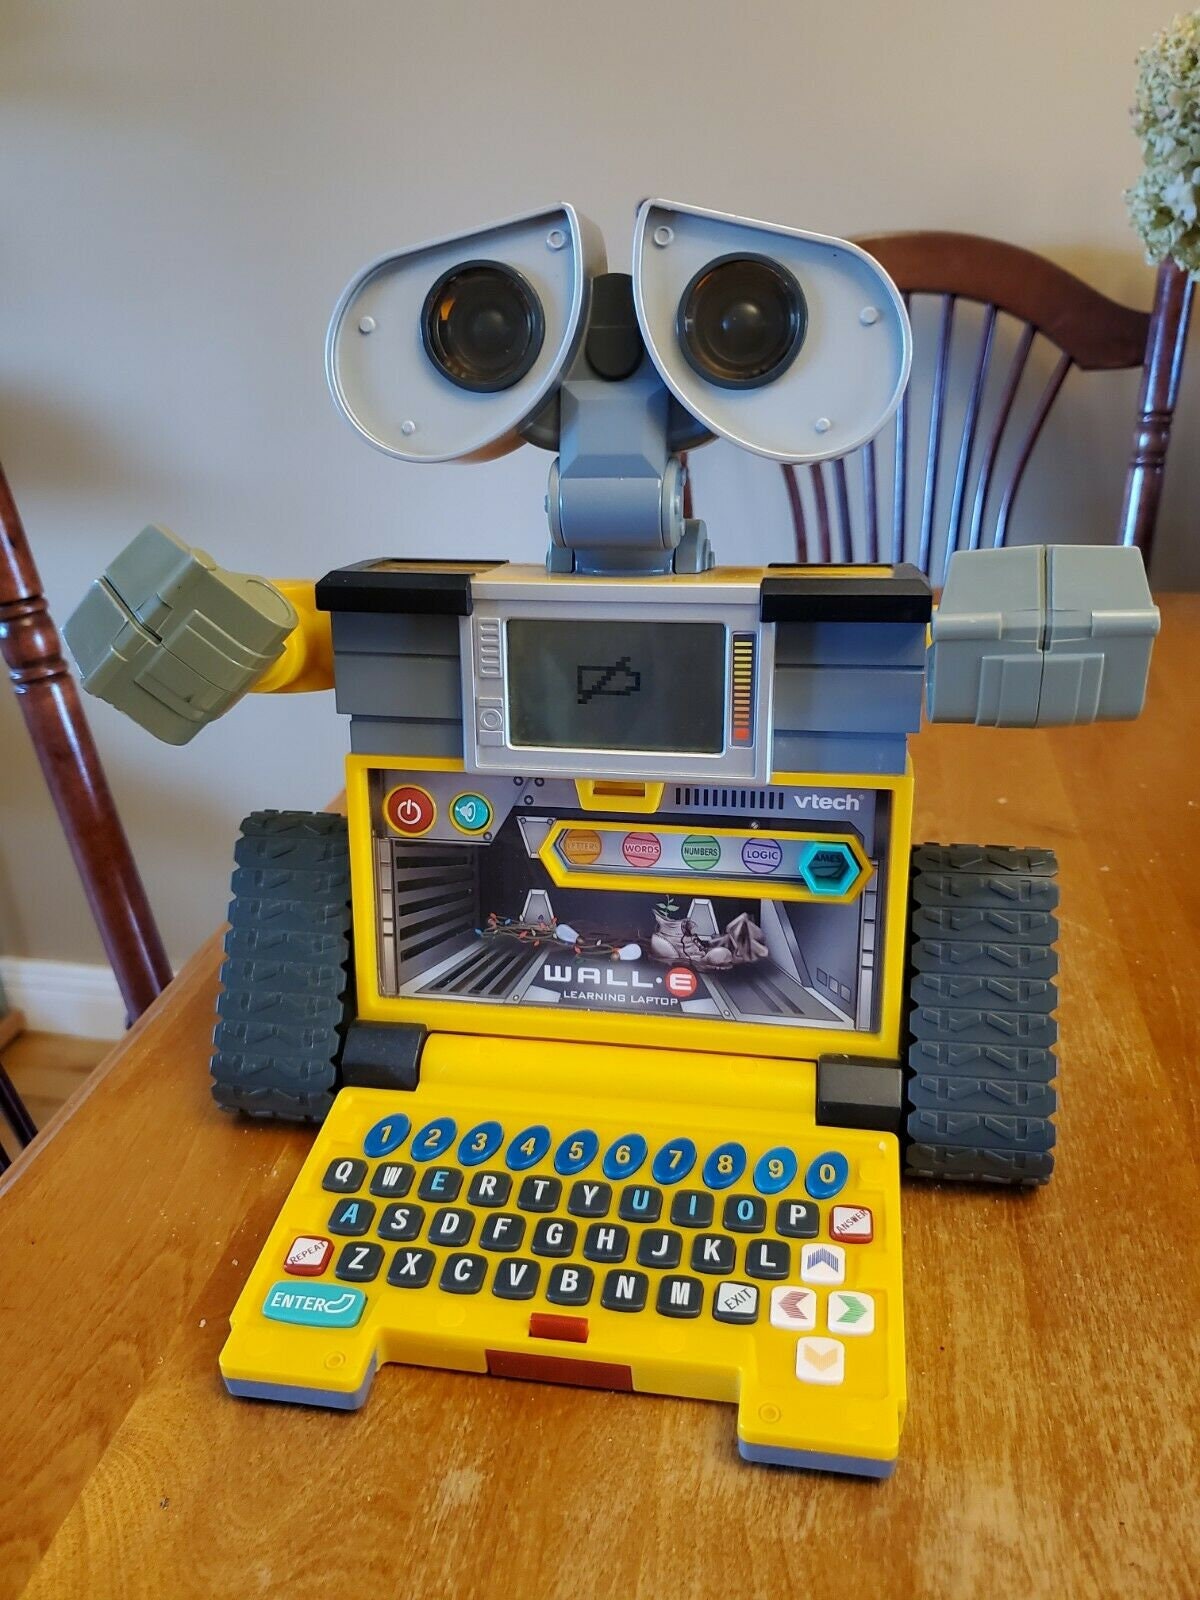 Electronic game:Wall-E Learning Laptop - VTECH — Google Arts & Culture